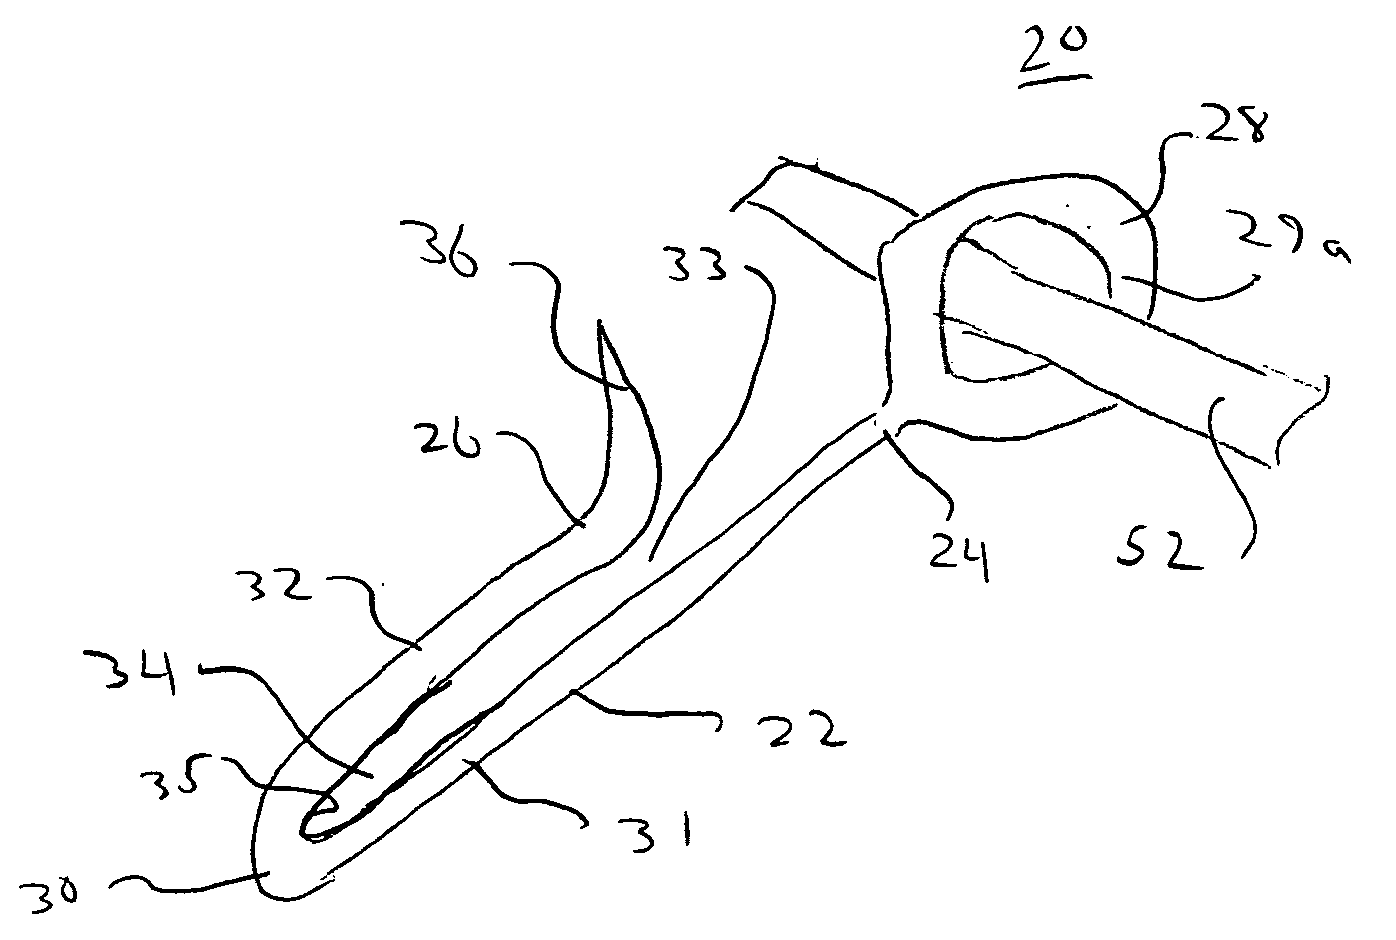 System and method for harvesting grape clusters